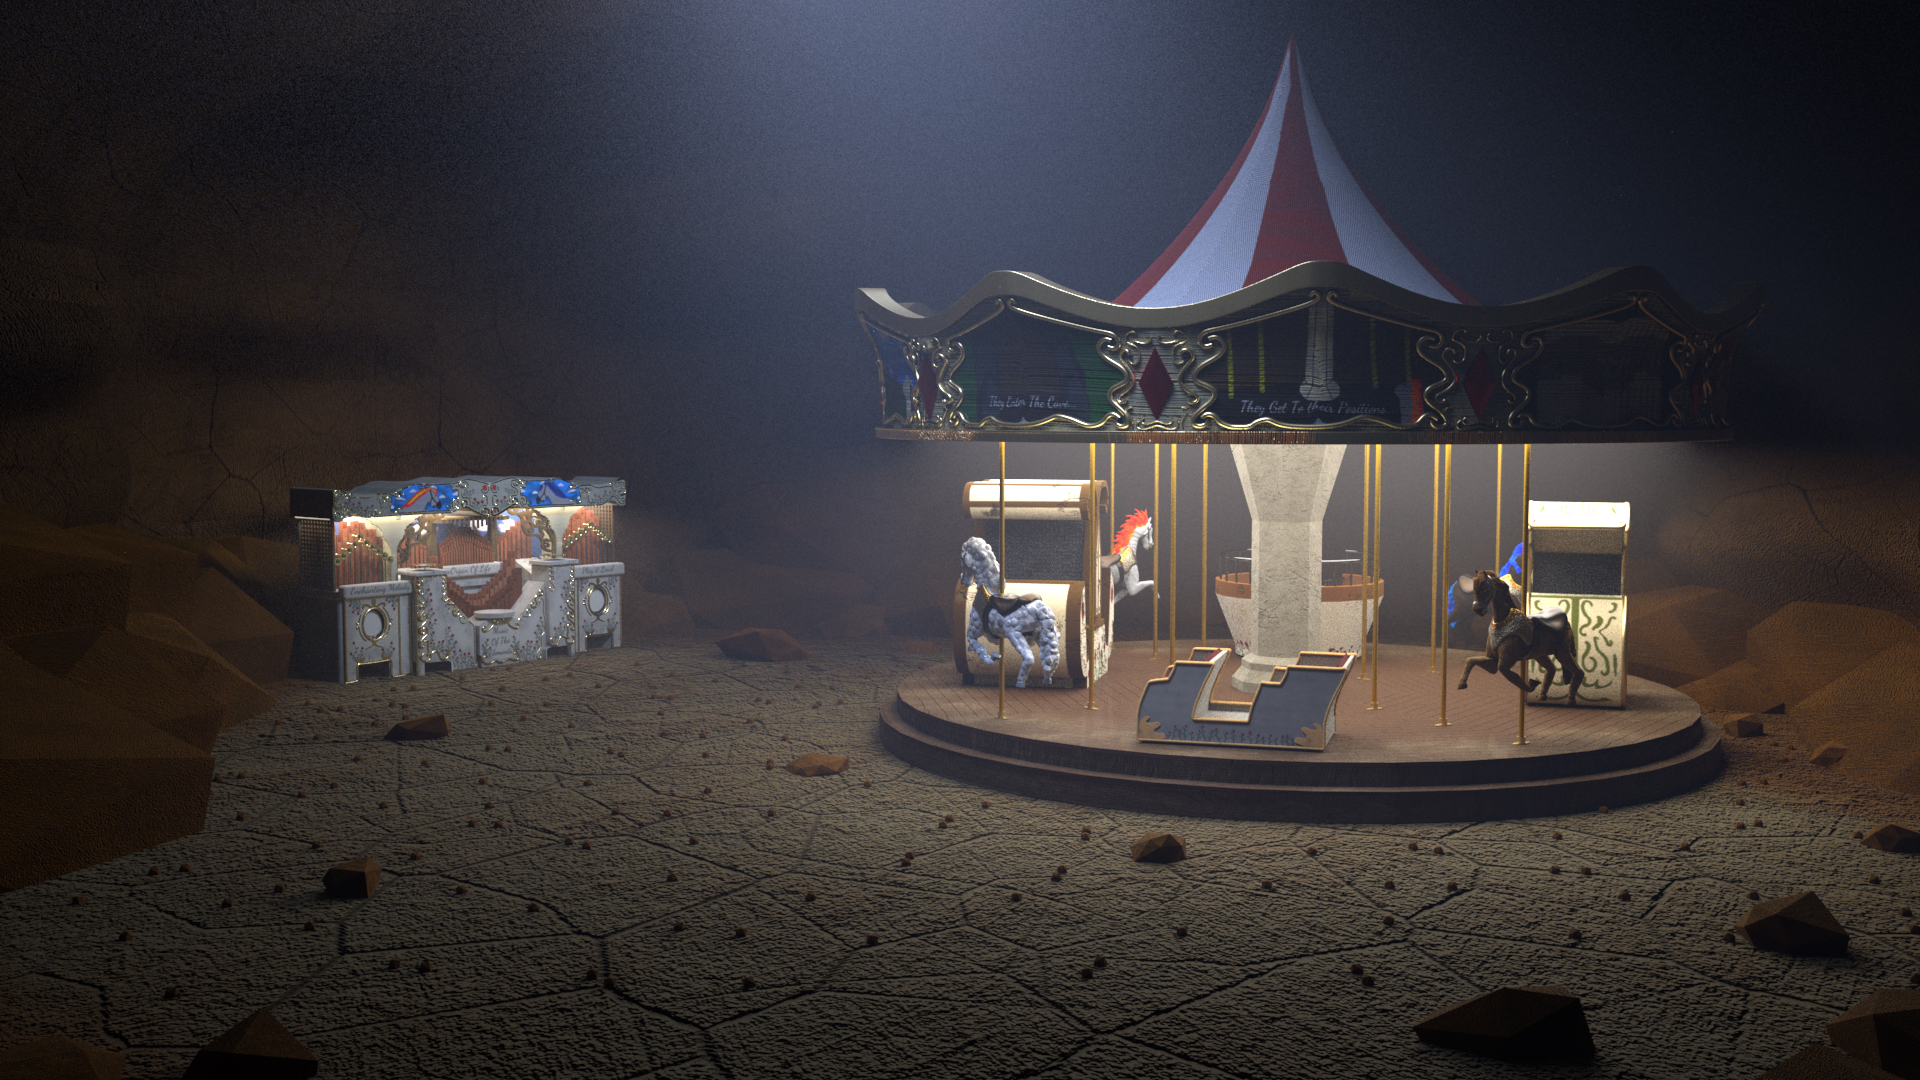 A 3D Render showcasing a Carousel and an Fairground organ by Max Rozier.